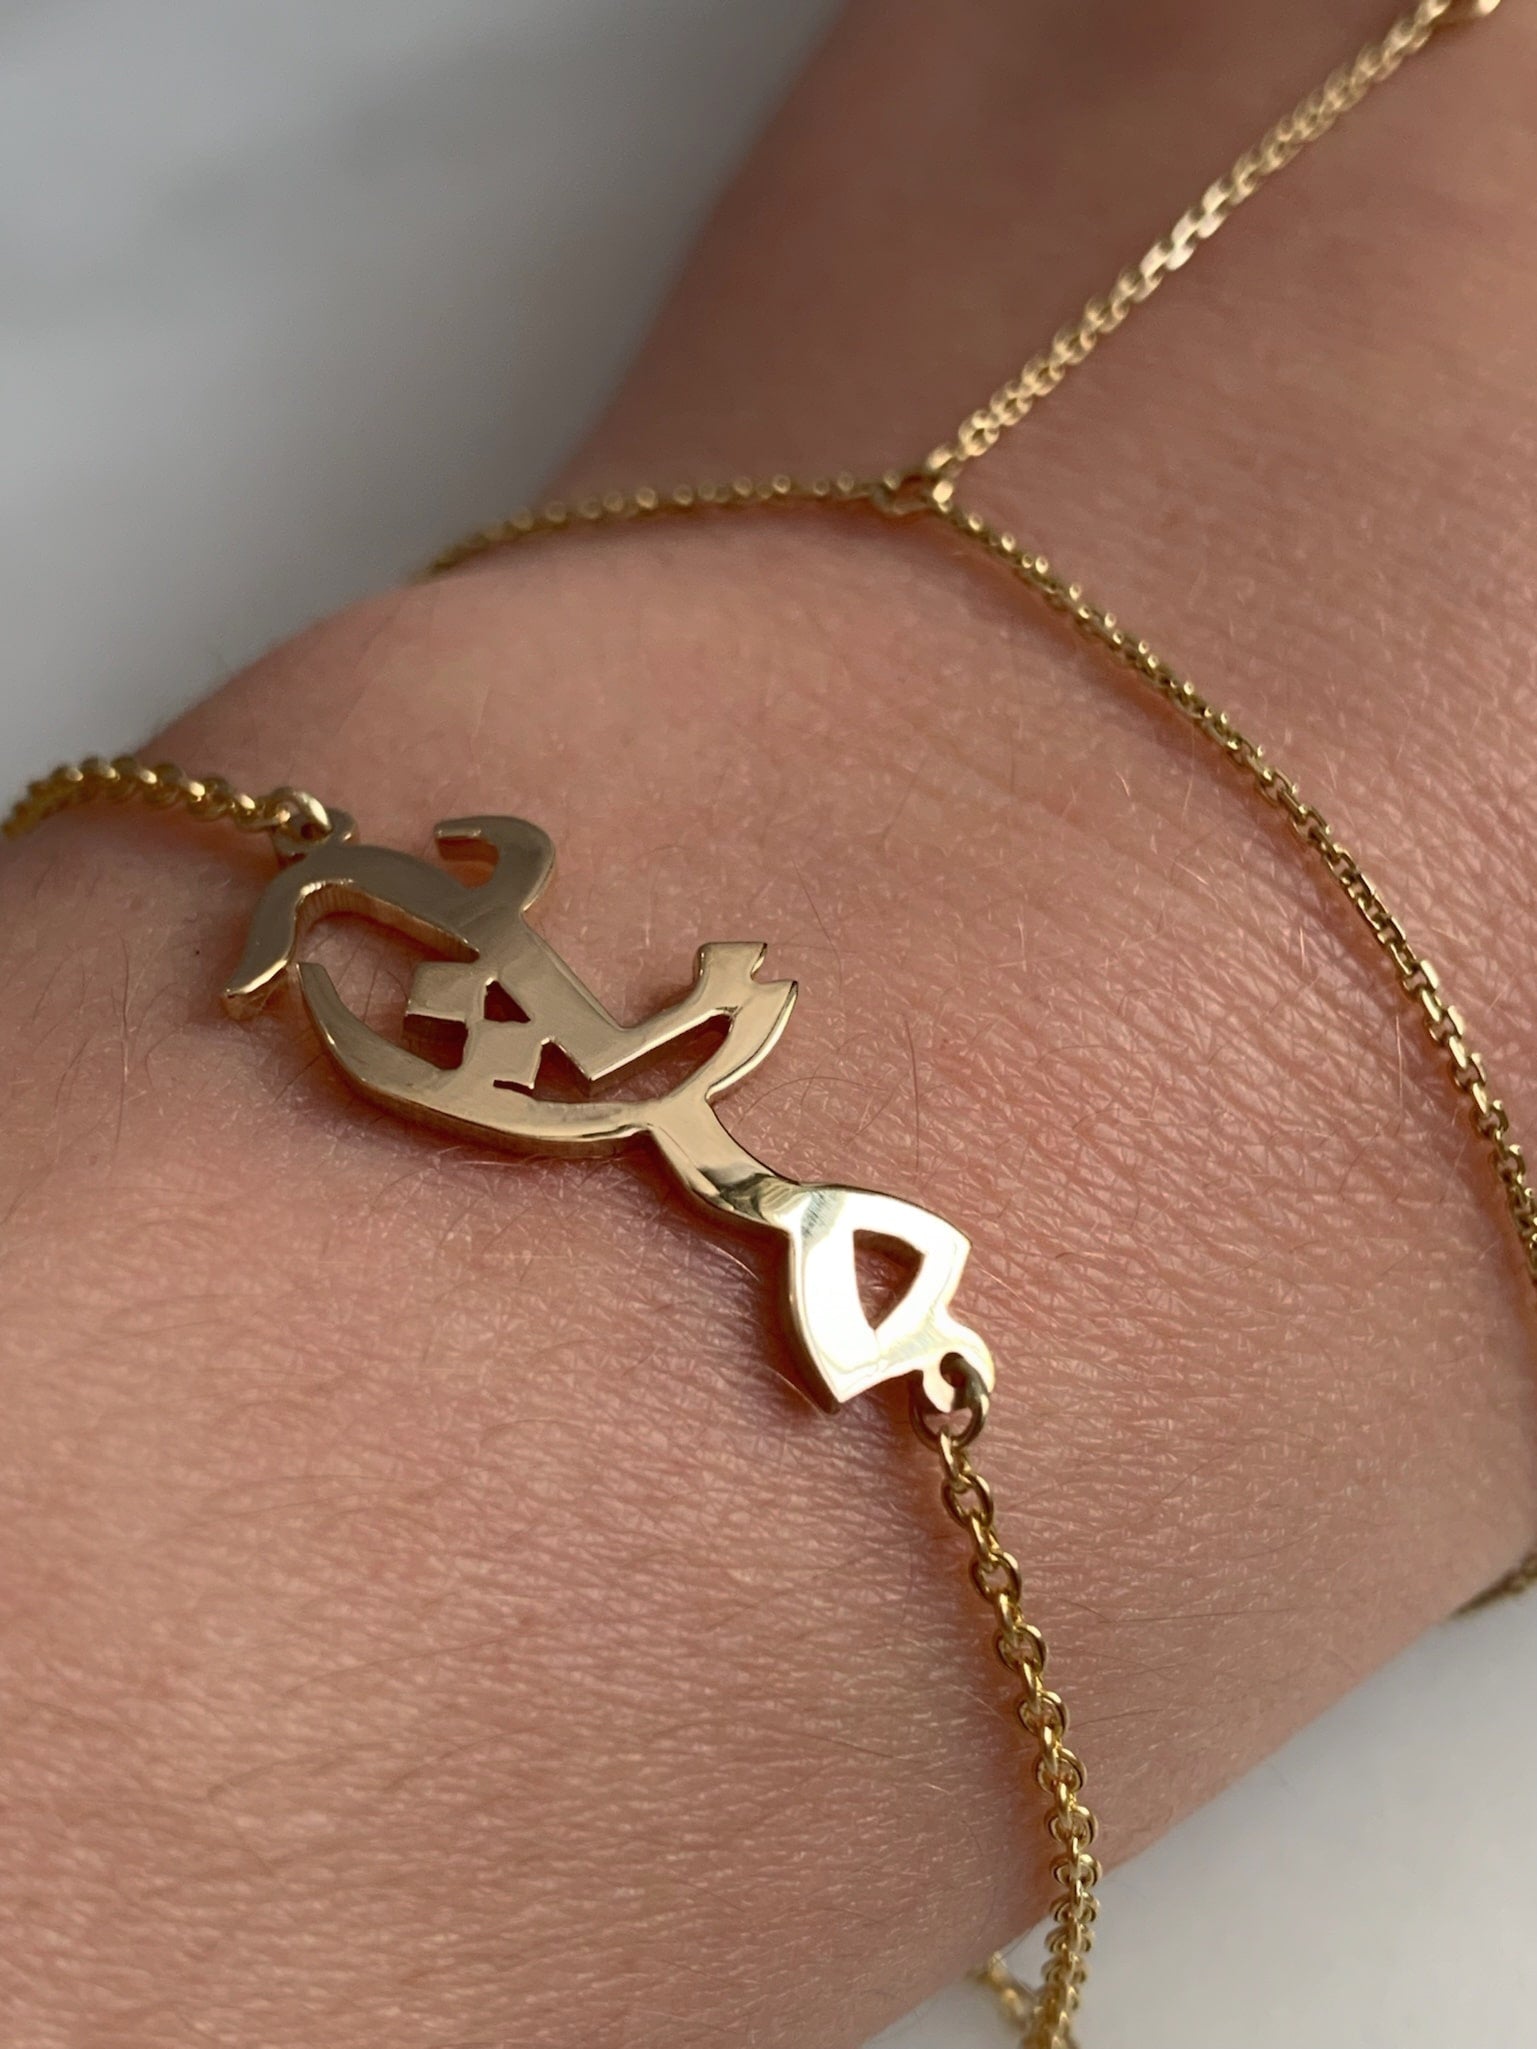 Get the Perfect Kids' Initial & Name Bracelets | GLAMIRA.in